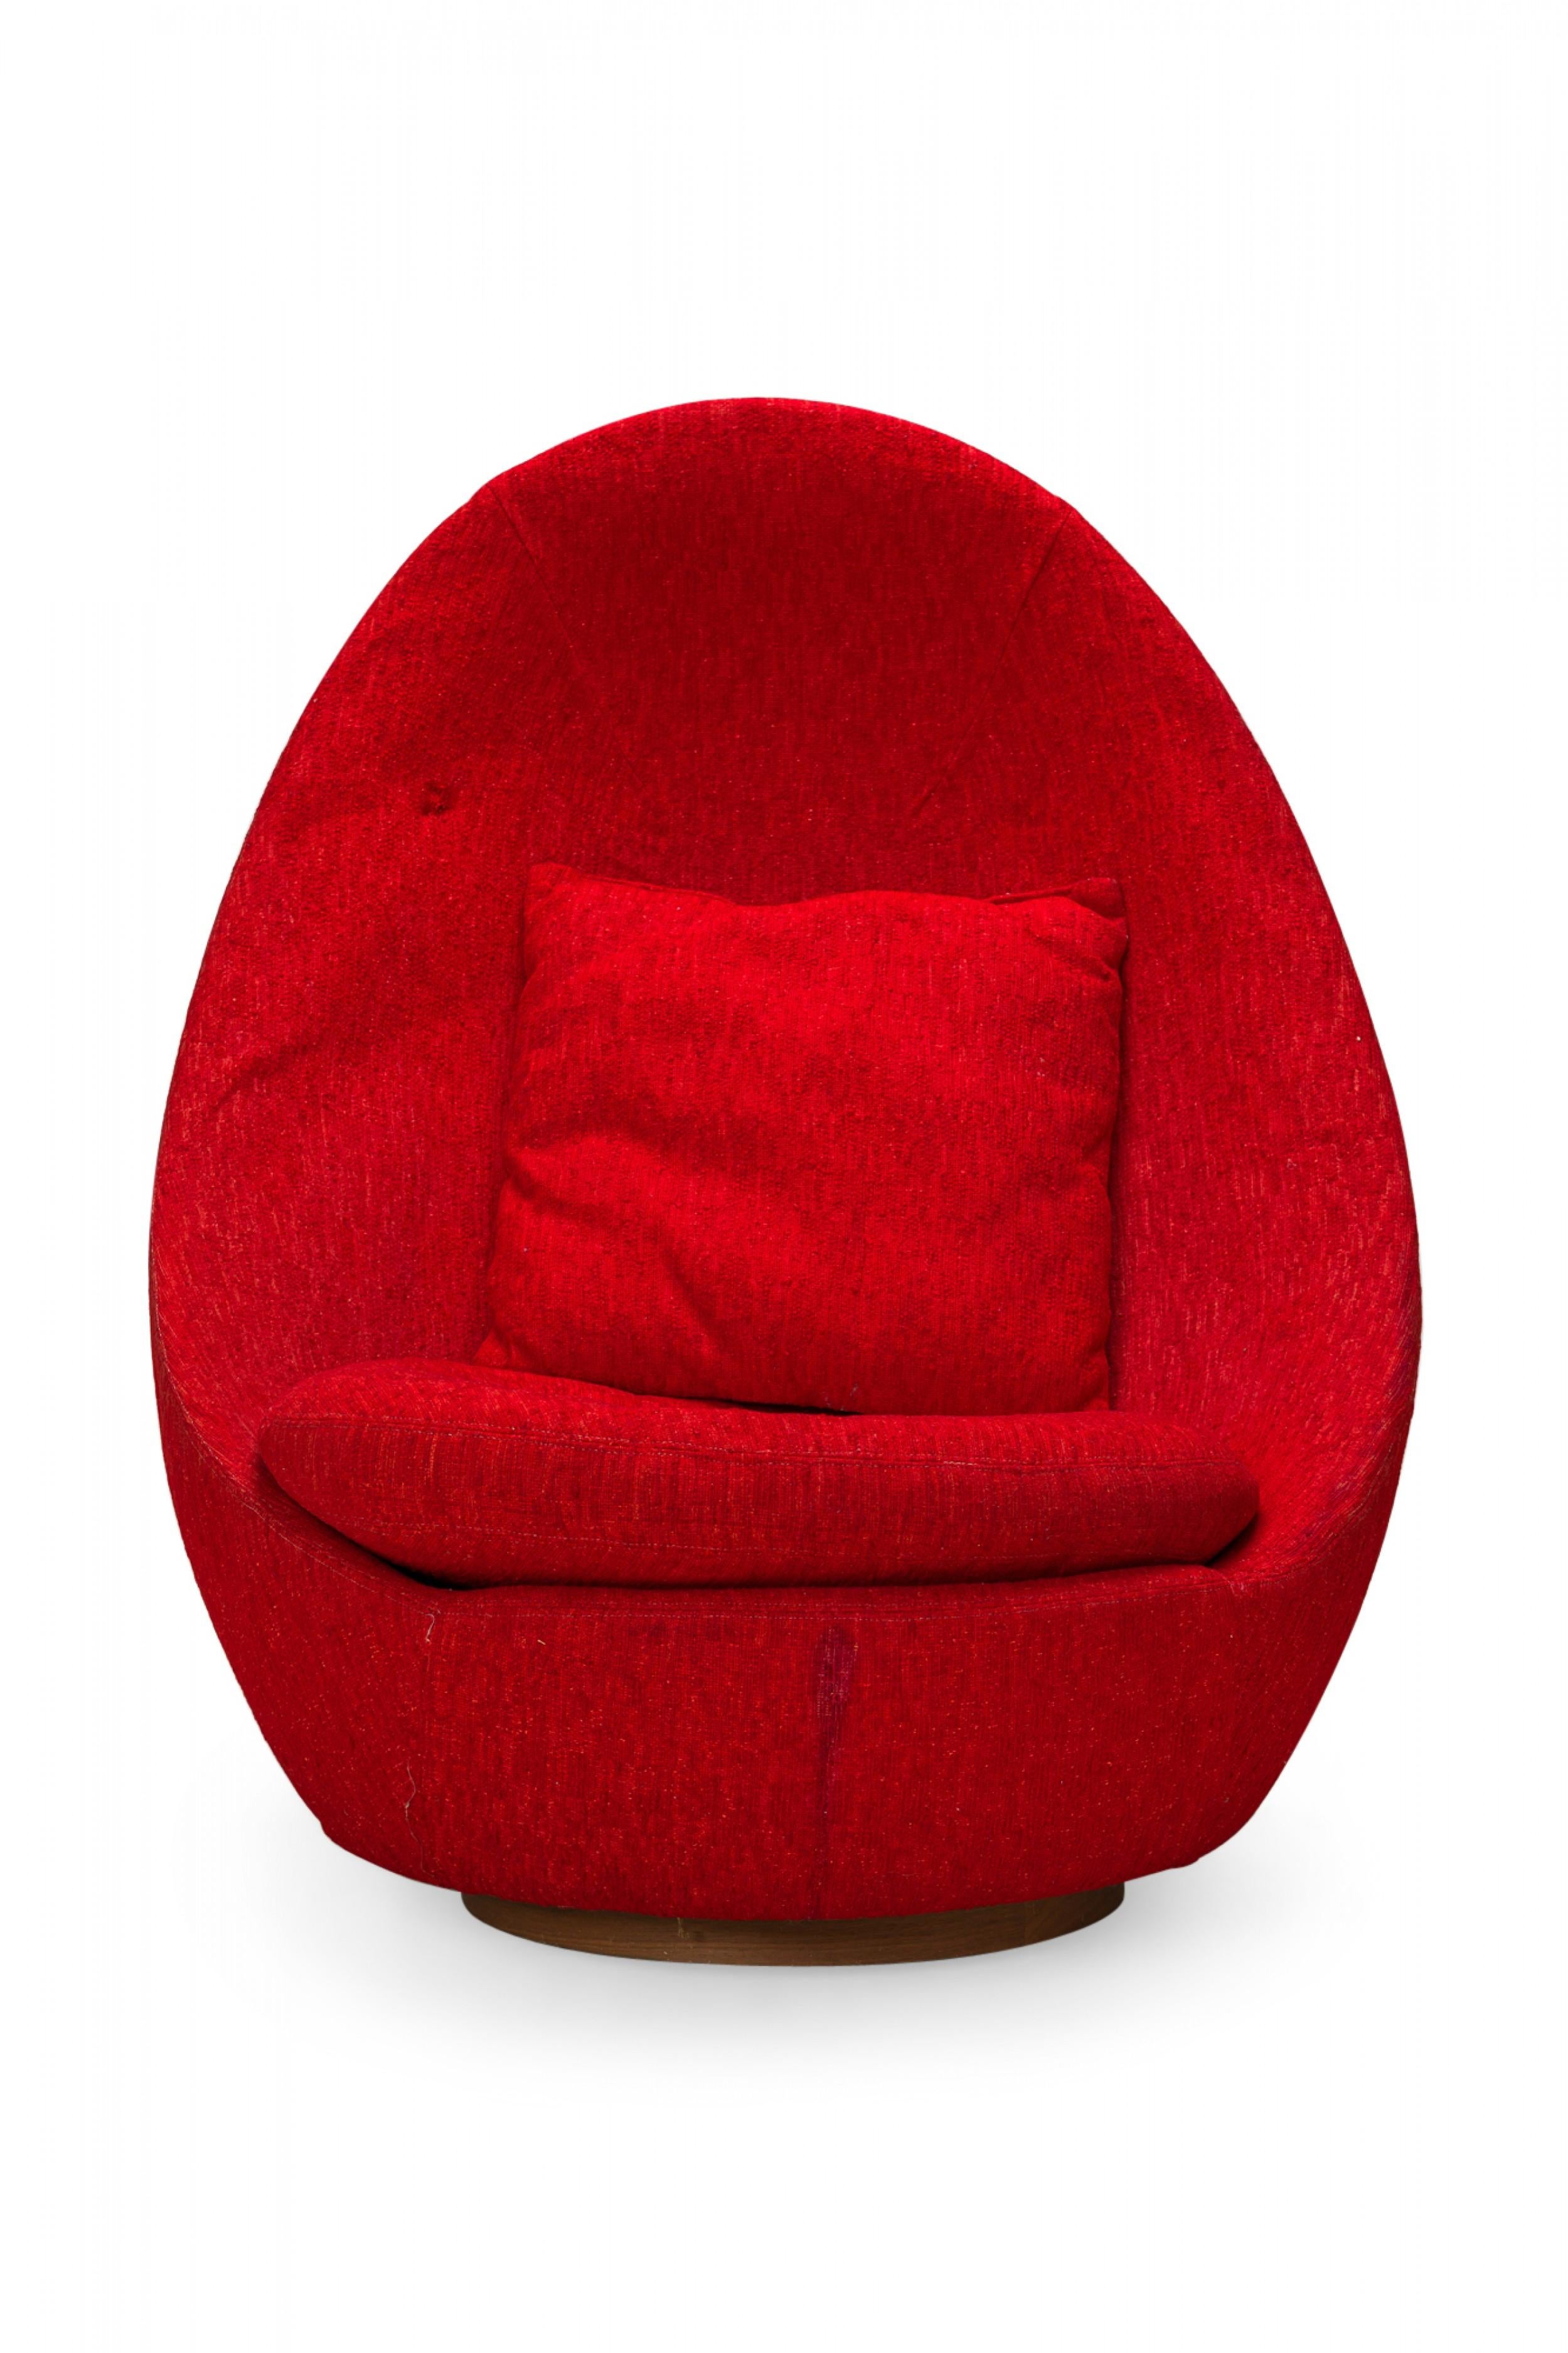 American Mid-Century swivel egg chair with a curved egg-like form upholstered in textured red upholstery with a matching throw pillow. (MILO BAUGHMAN)(Available in other fabrics: DUF0342, DUF0343)
